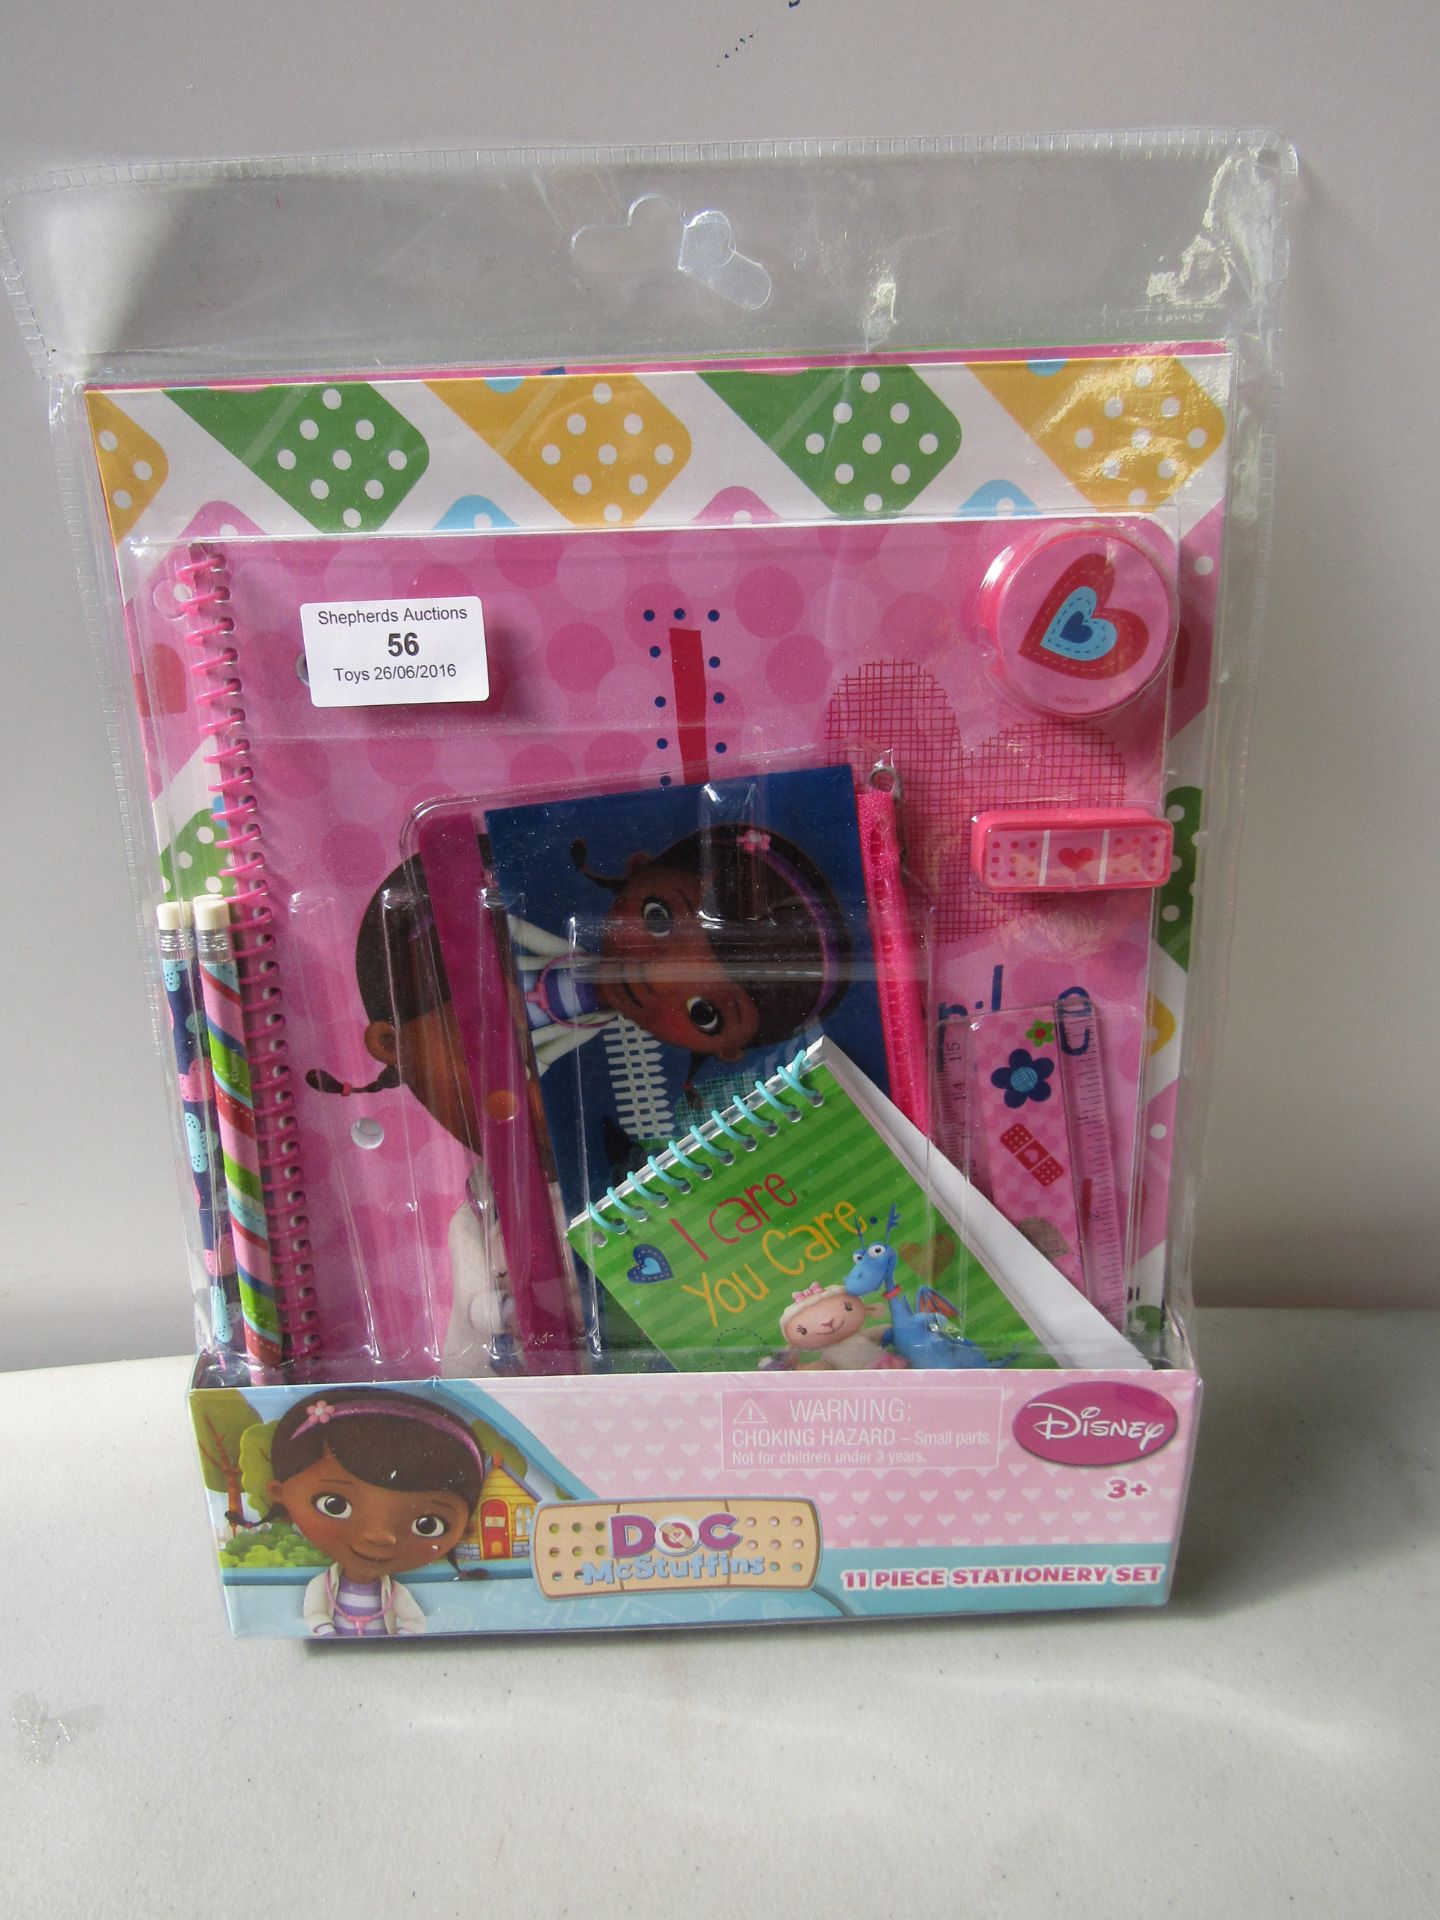 Doc McStuffins 11 Piece Stationary Set. In Packaging.